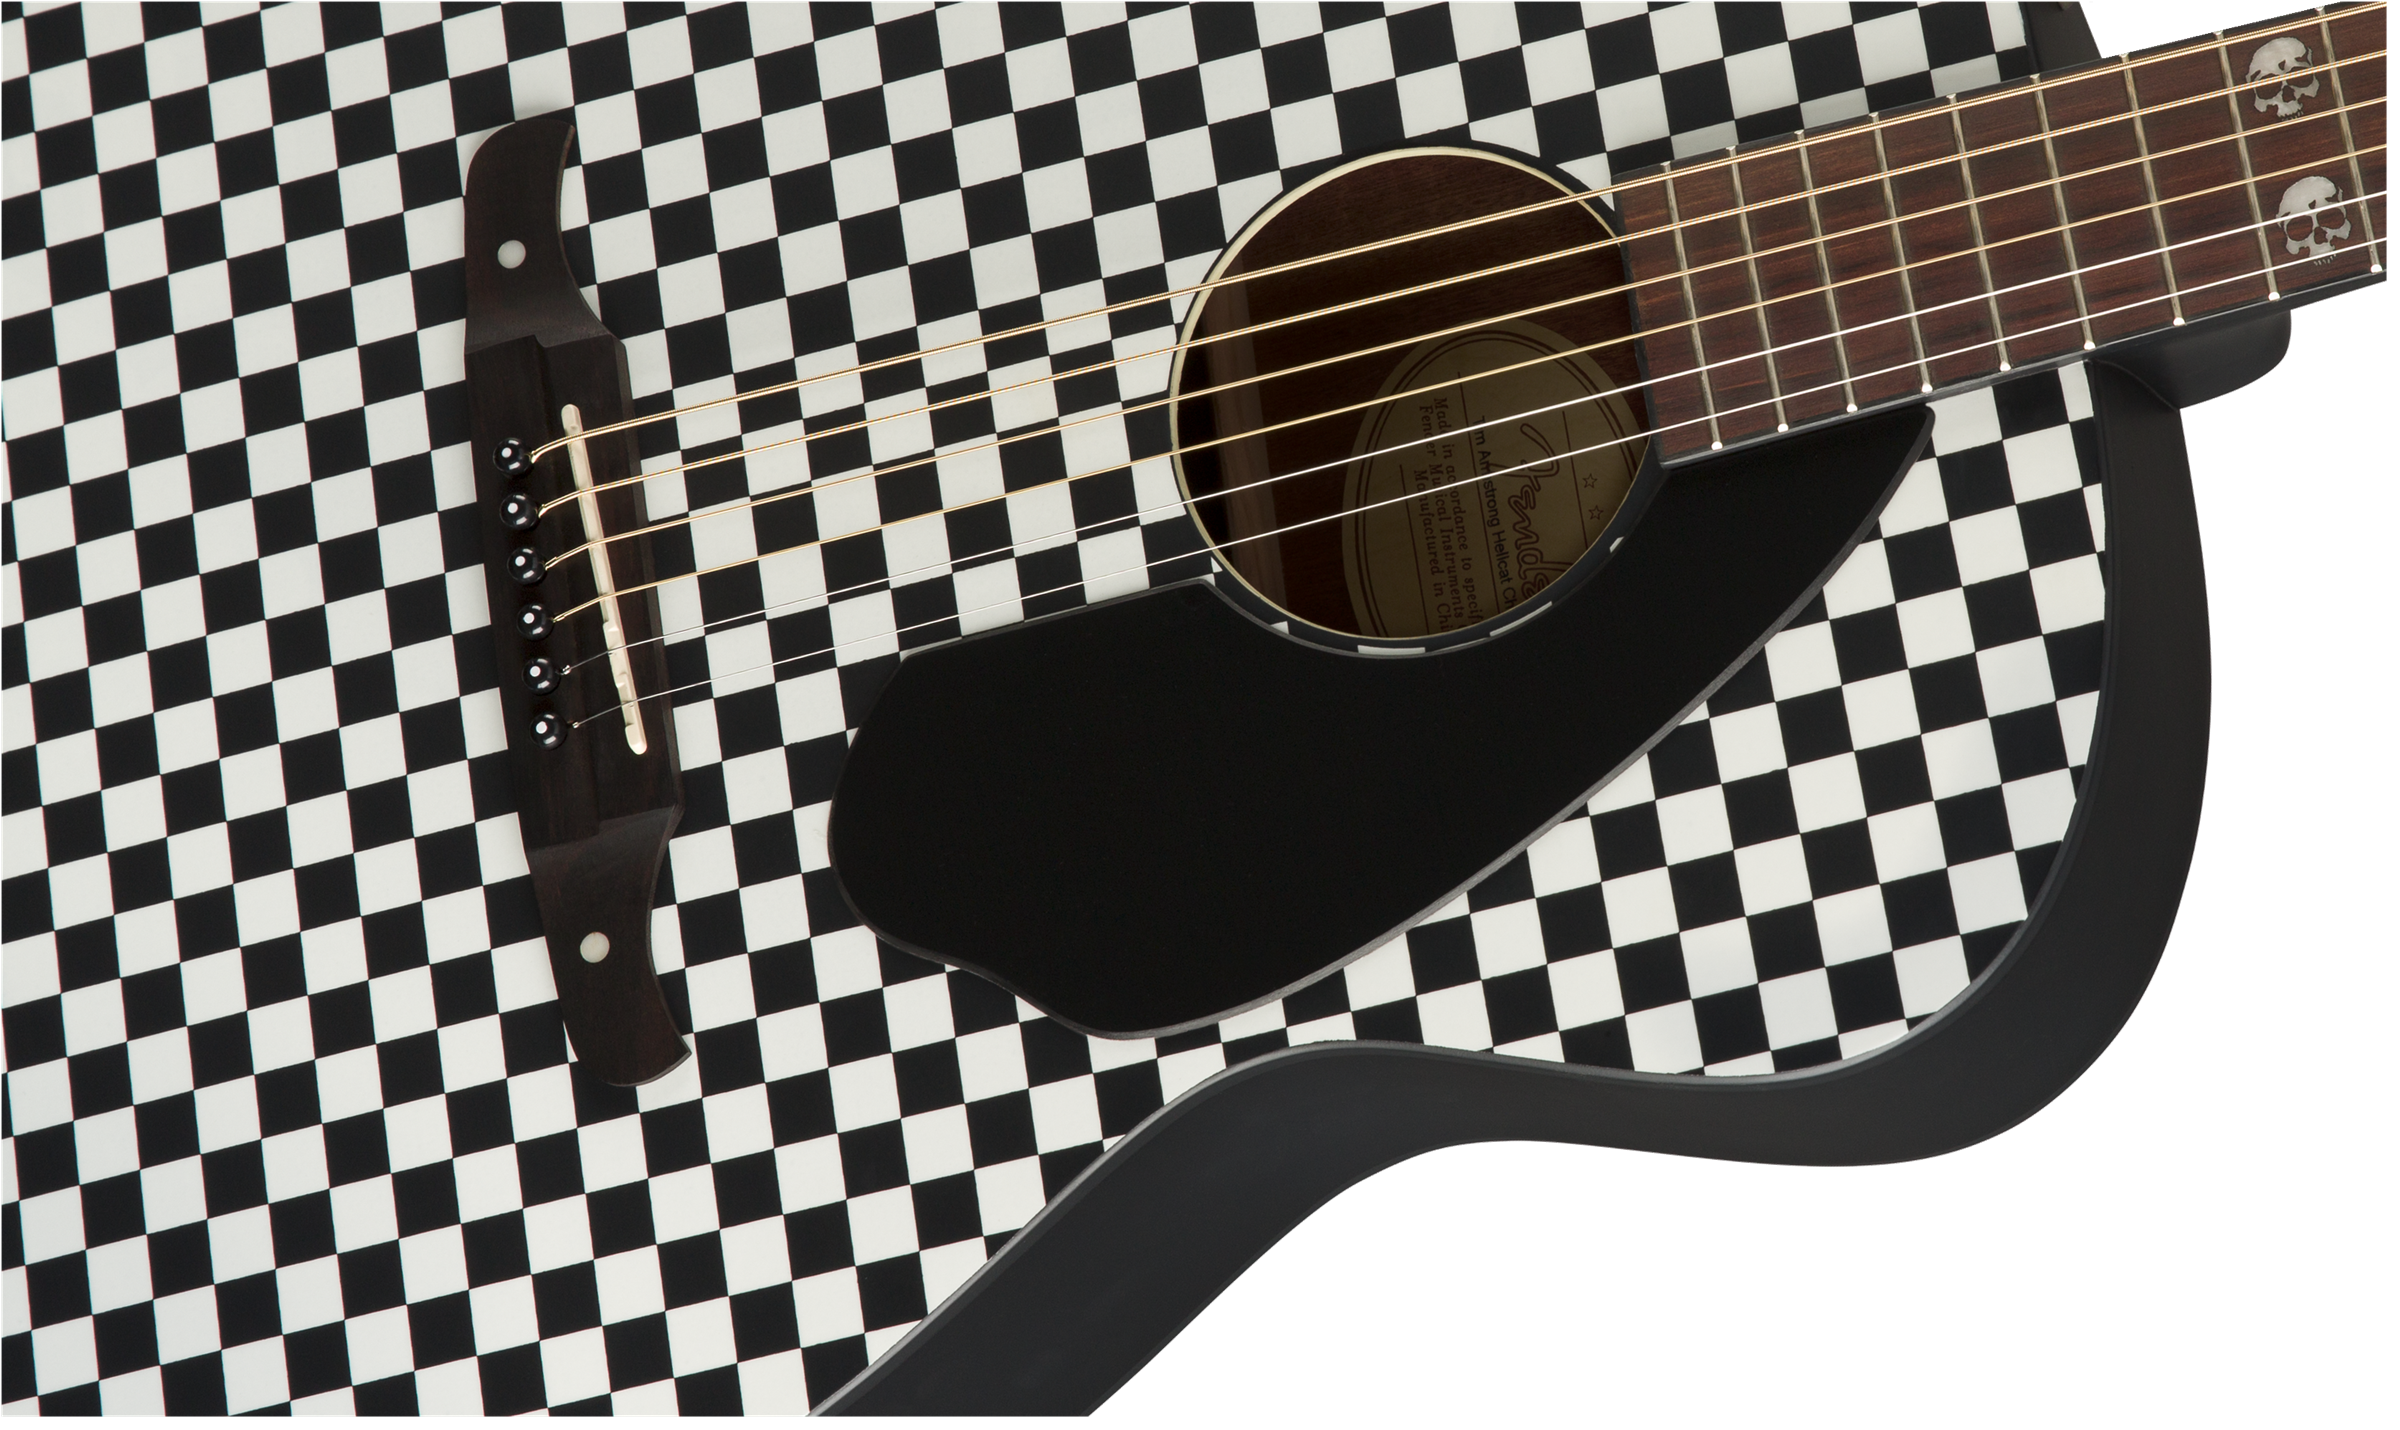 Fender Tim Armstrong Hellcat Epicea Acajou Wal - Checkerboard White/black - Electro acoustic guitar - Variation 3